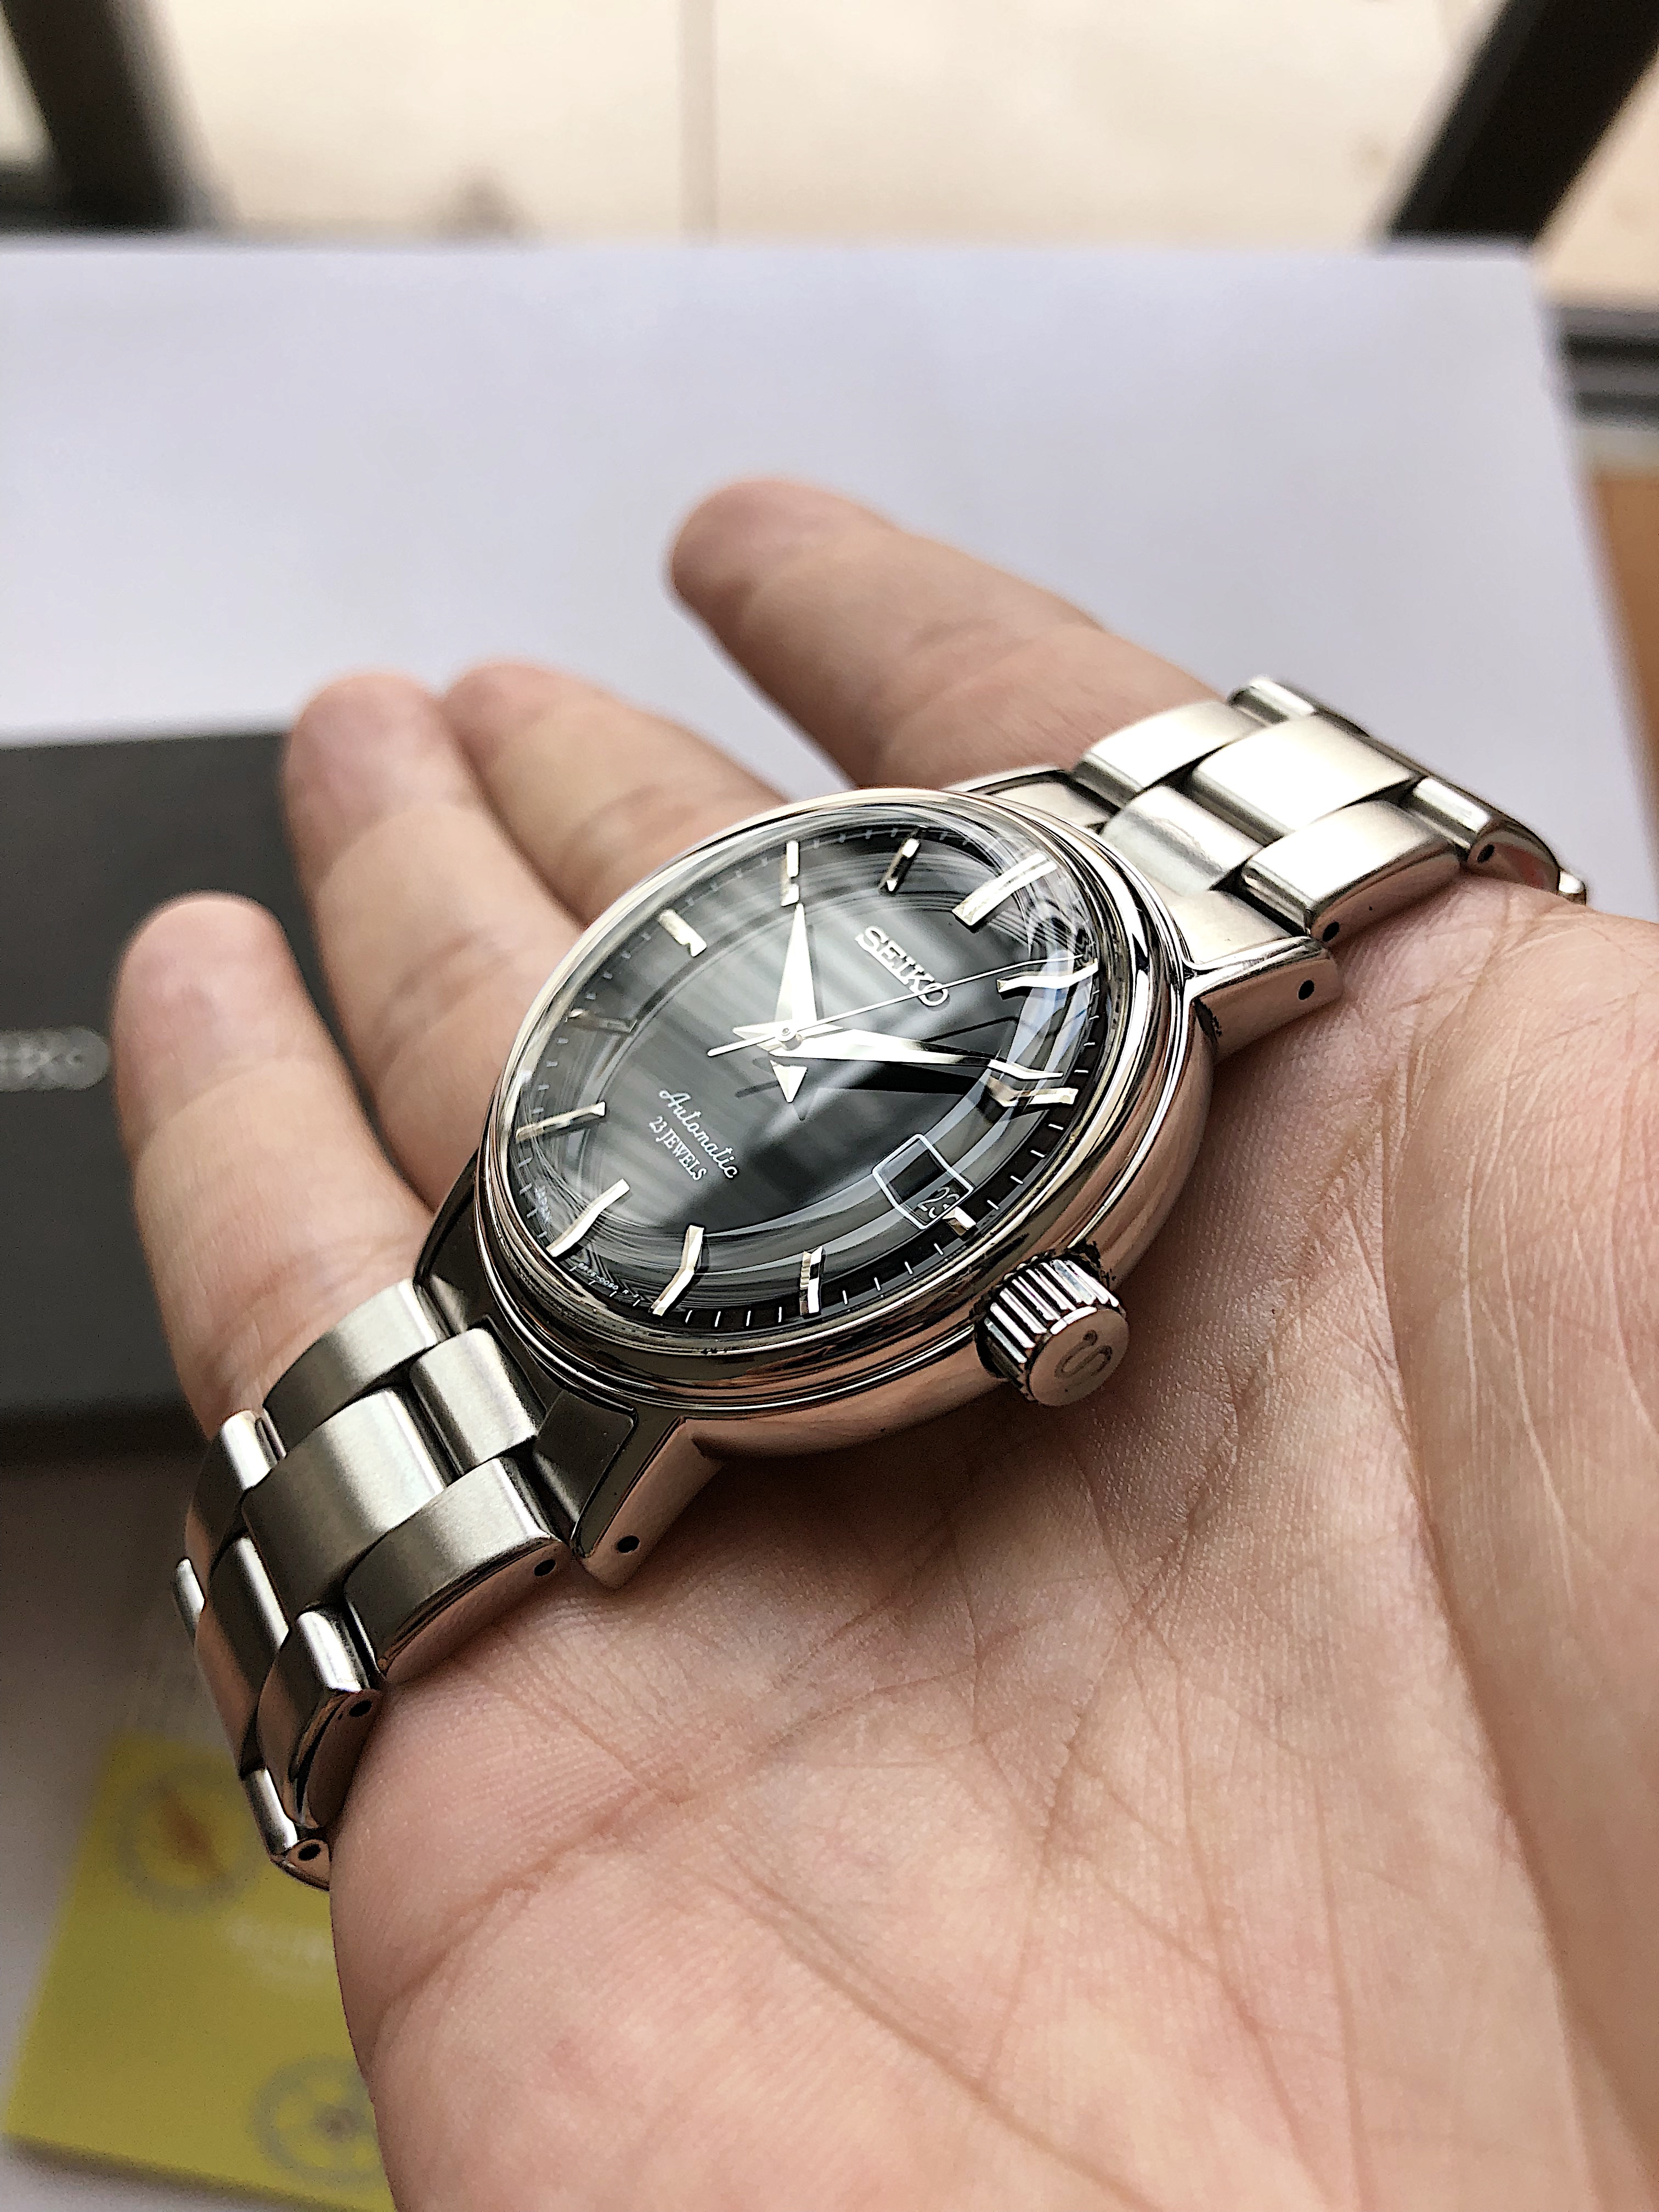 FS] AMAZING RARE SEIKO SARB029 IN VERY GOOD CONDITION | WatchCharts